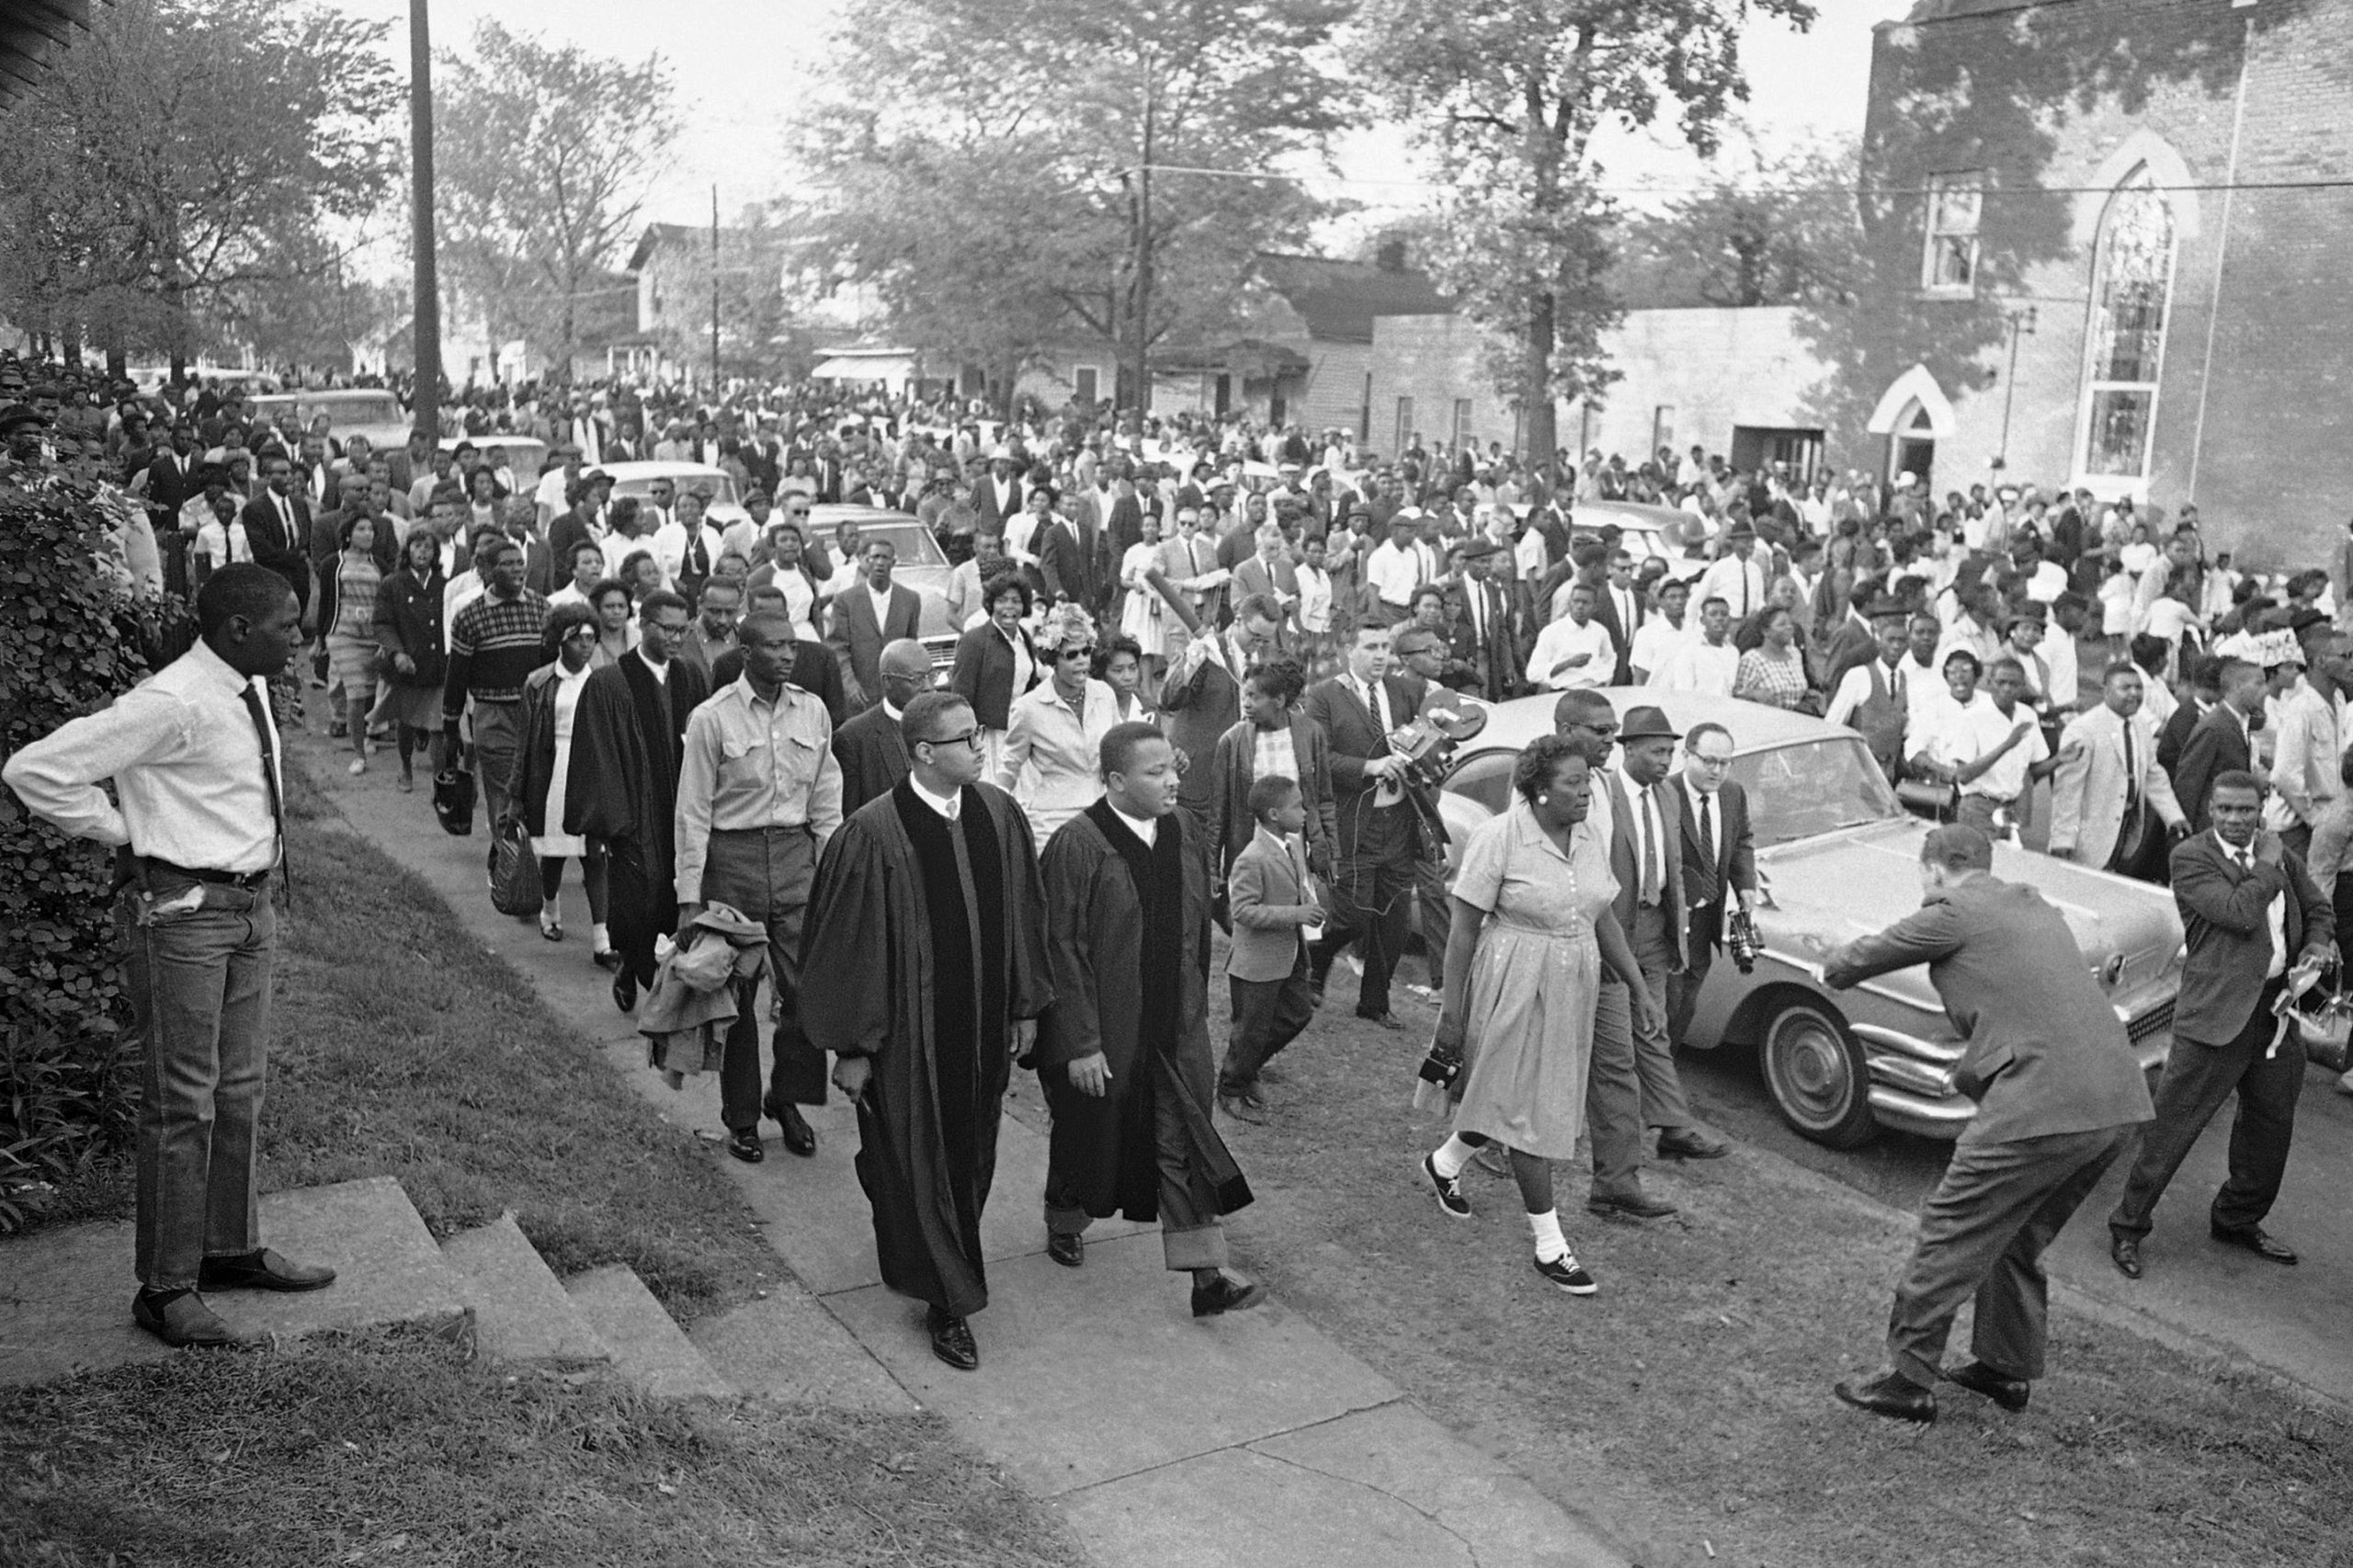 Birmingham, Alabama, Was the Birthplace of the Civil Rights Movement